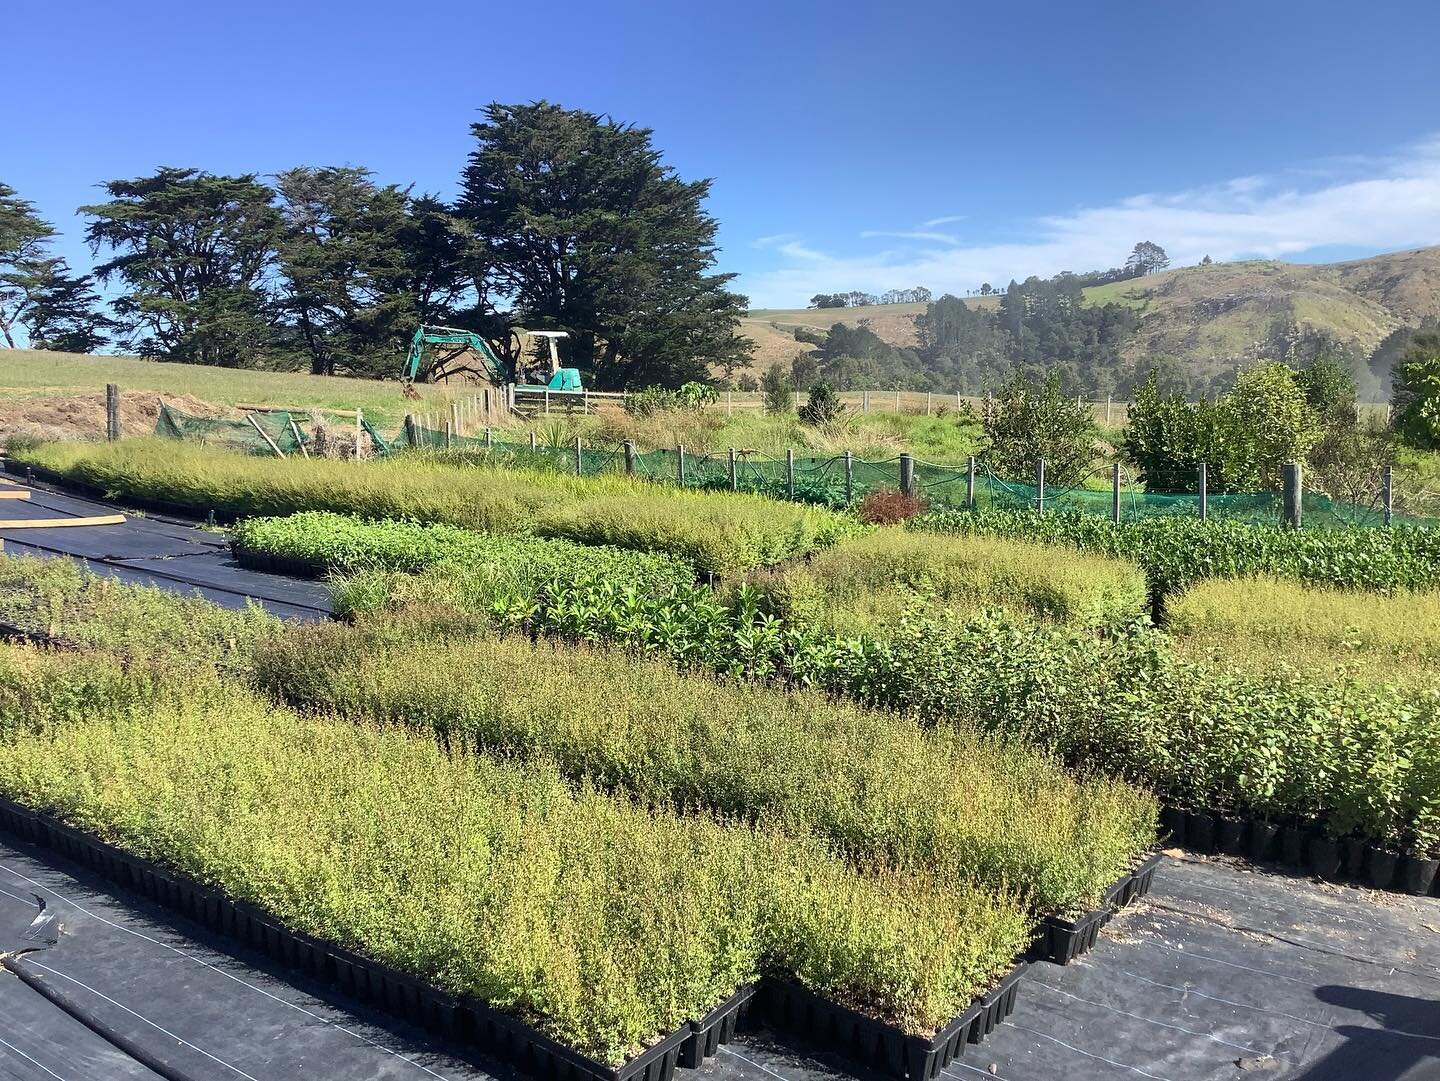 Checking out an off-grid, family-run native plant nursery in the Kaipara hill country, featuring a windmill, orchards and an ingenious irrigation system! 

Including small, local plant producers in catchment remediation projects can ensure that eco-s